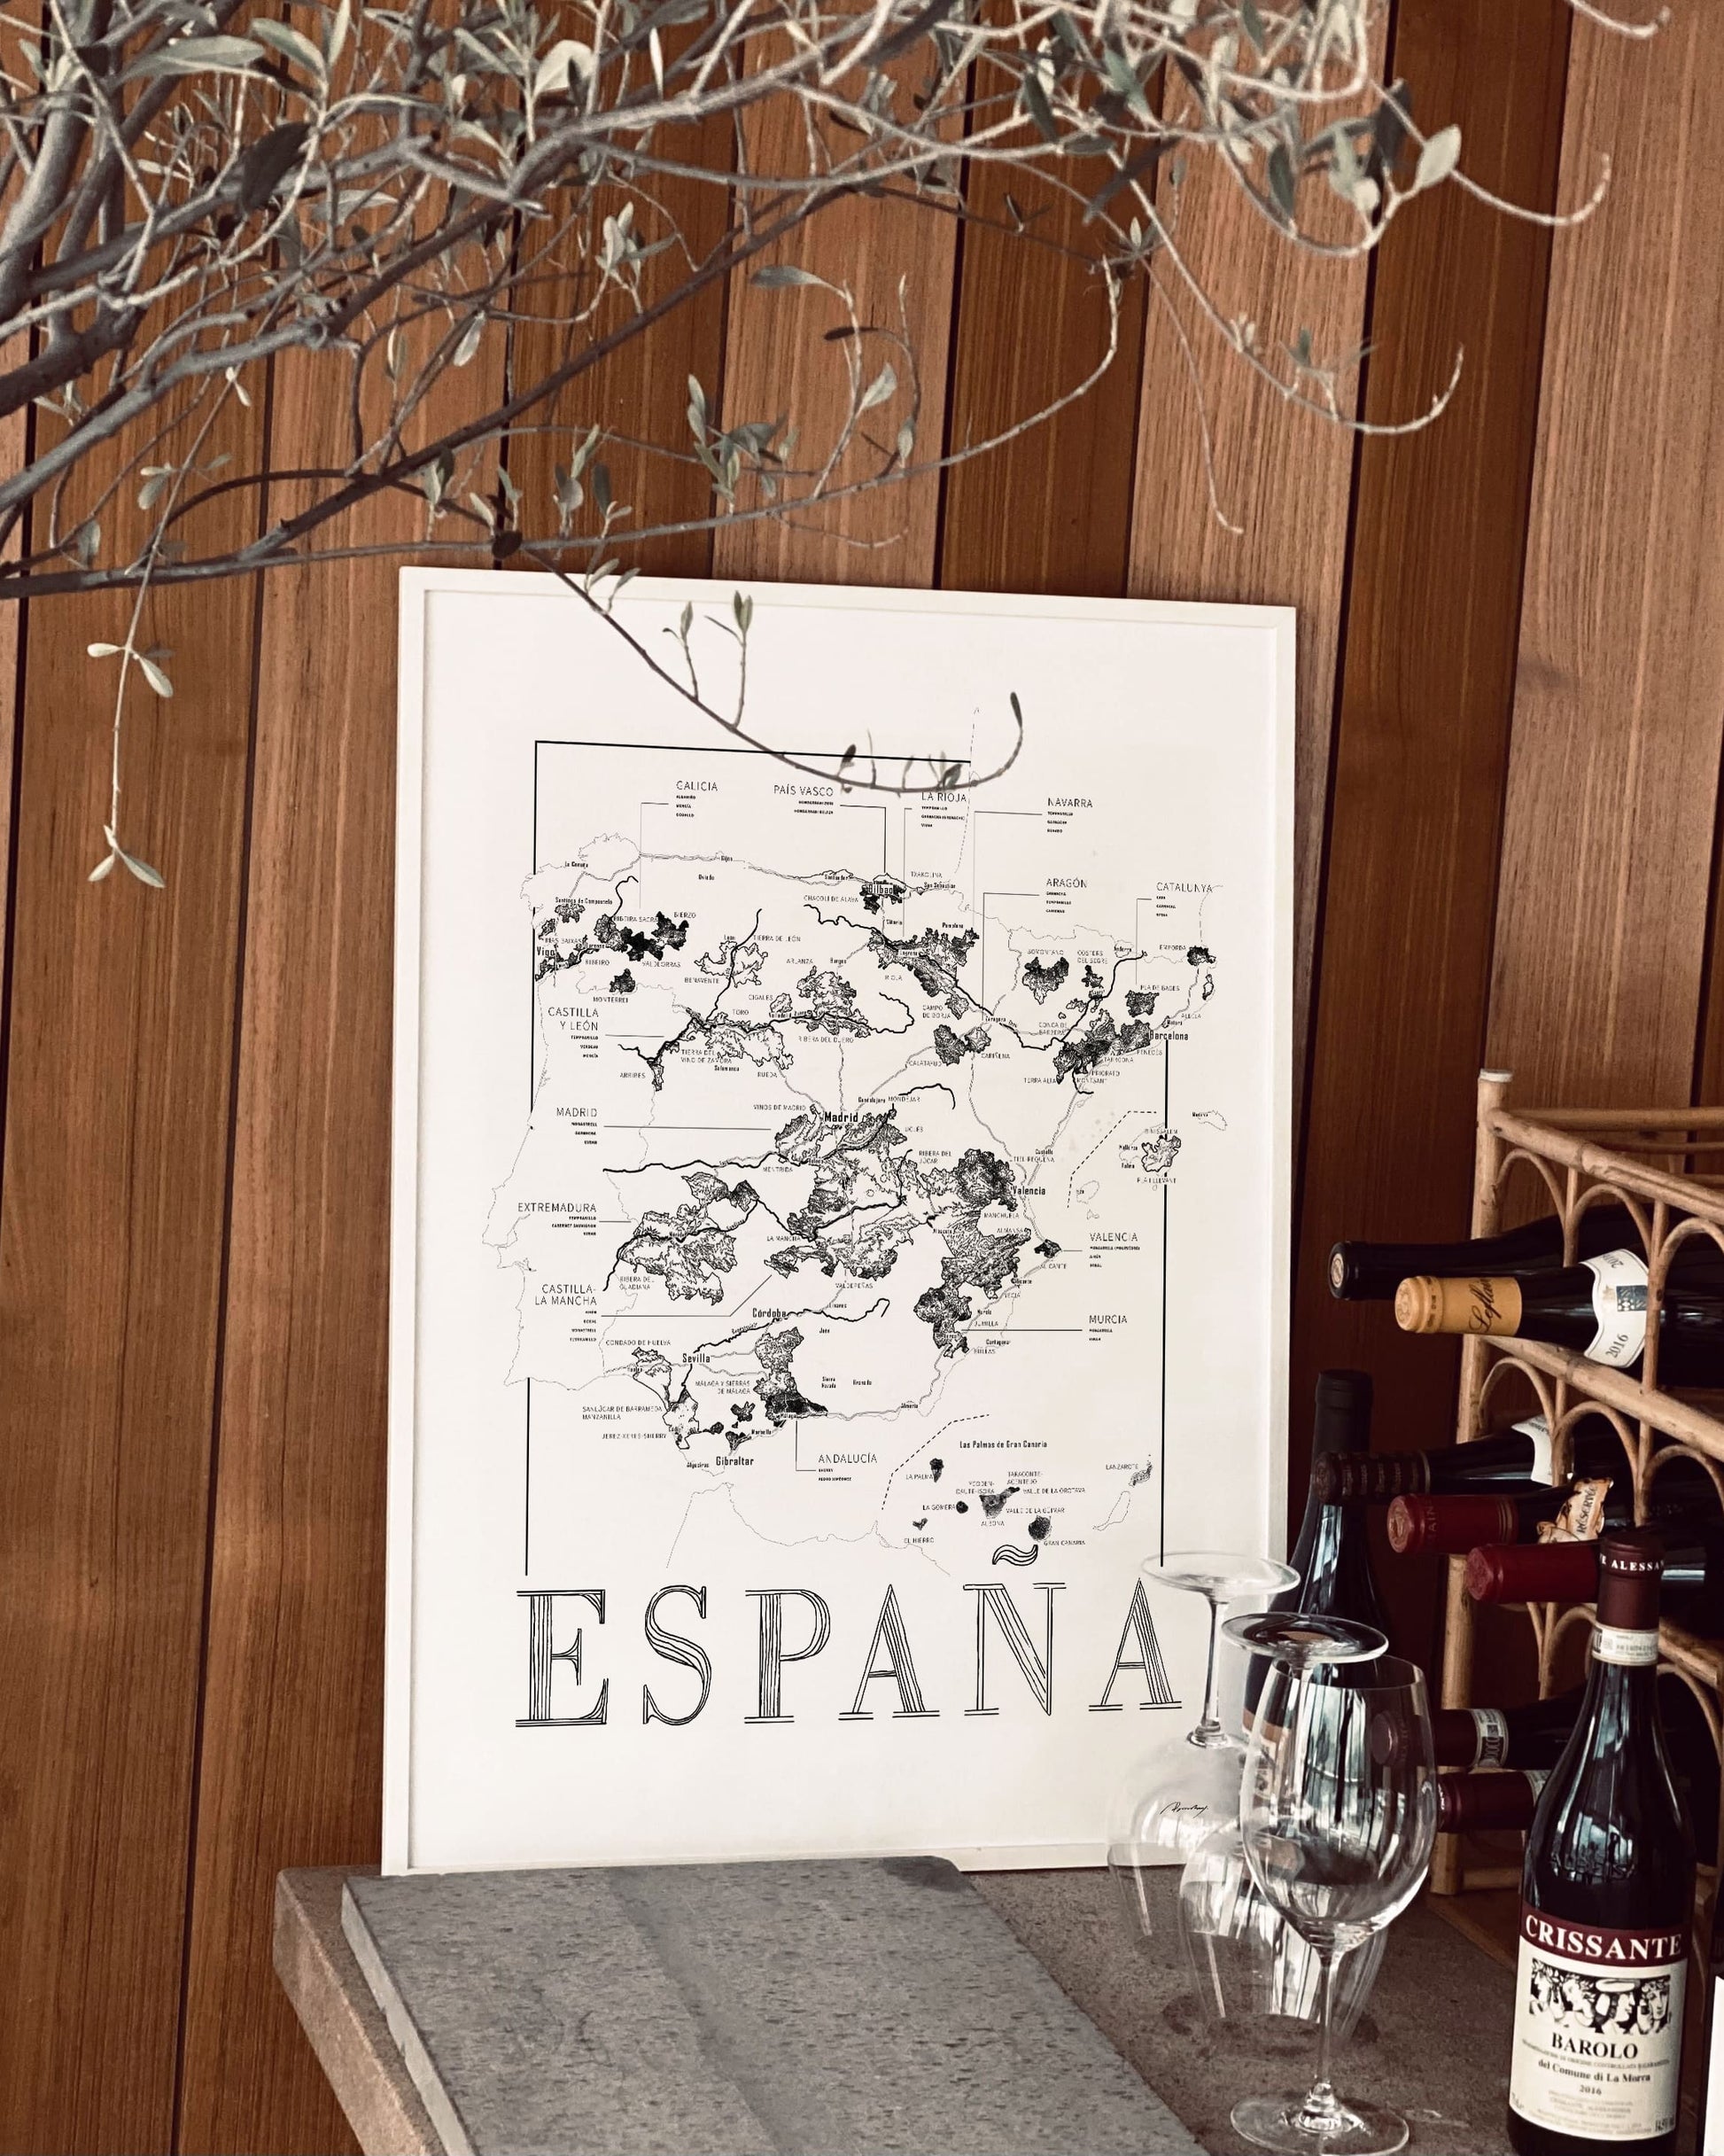 Spain wine map poster. Exclusive wine map posters. Premium quality wine maps printed on environmentally friendly FSC marked paper.